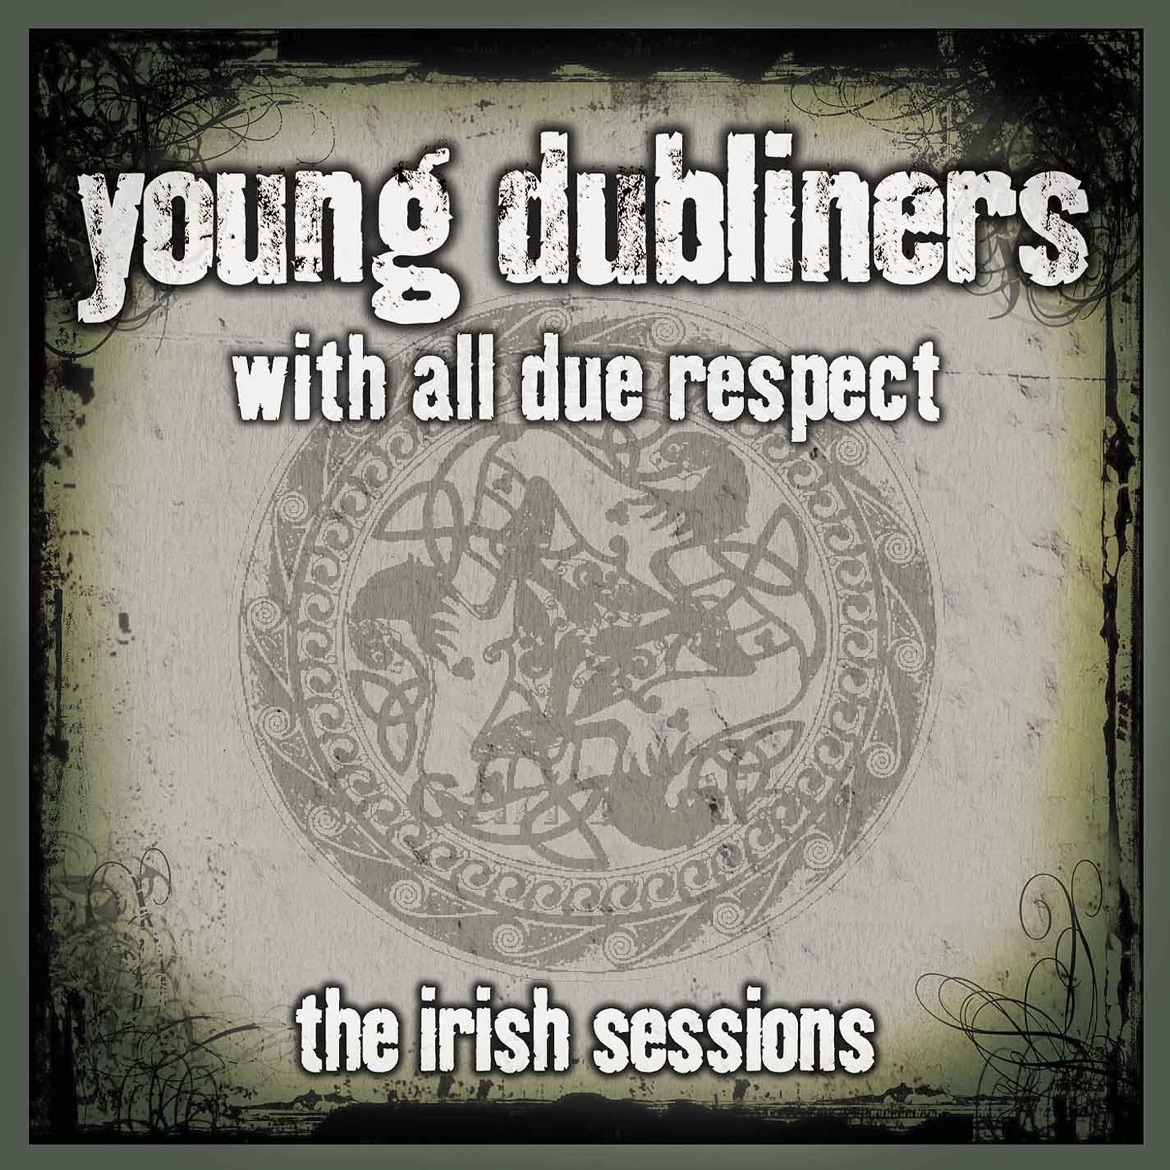 #nowplaying The Leaving of Liverpool by The Young Dubliners.